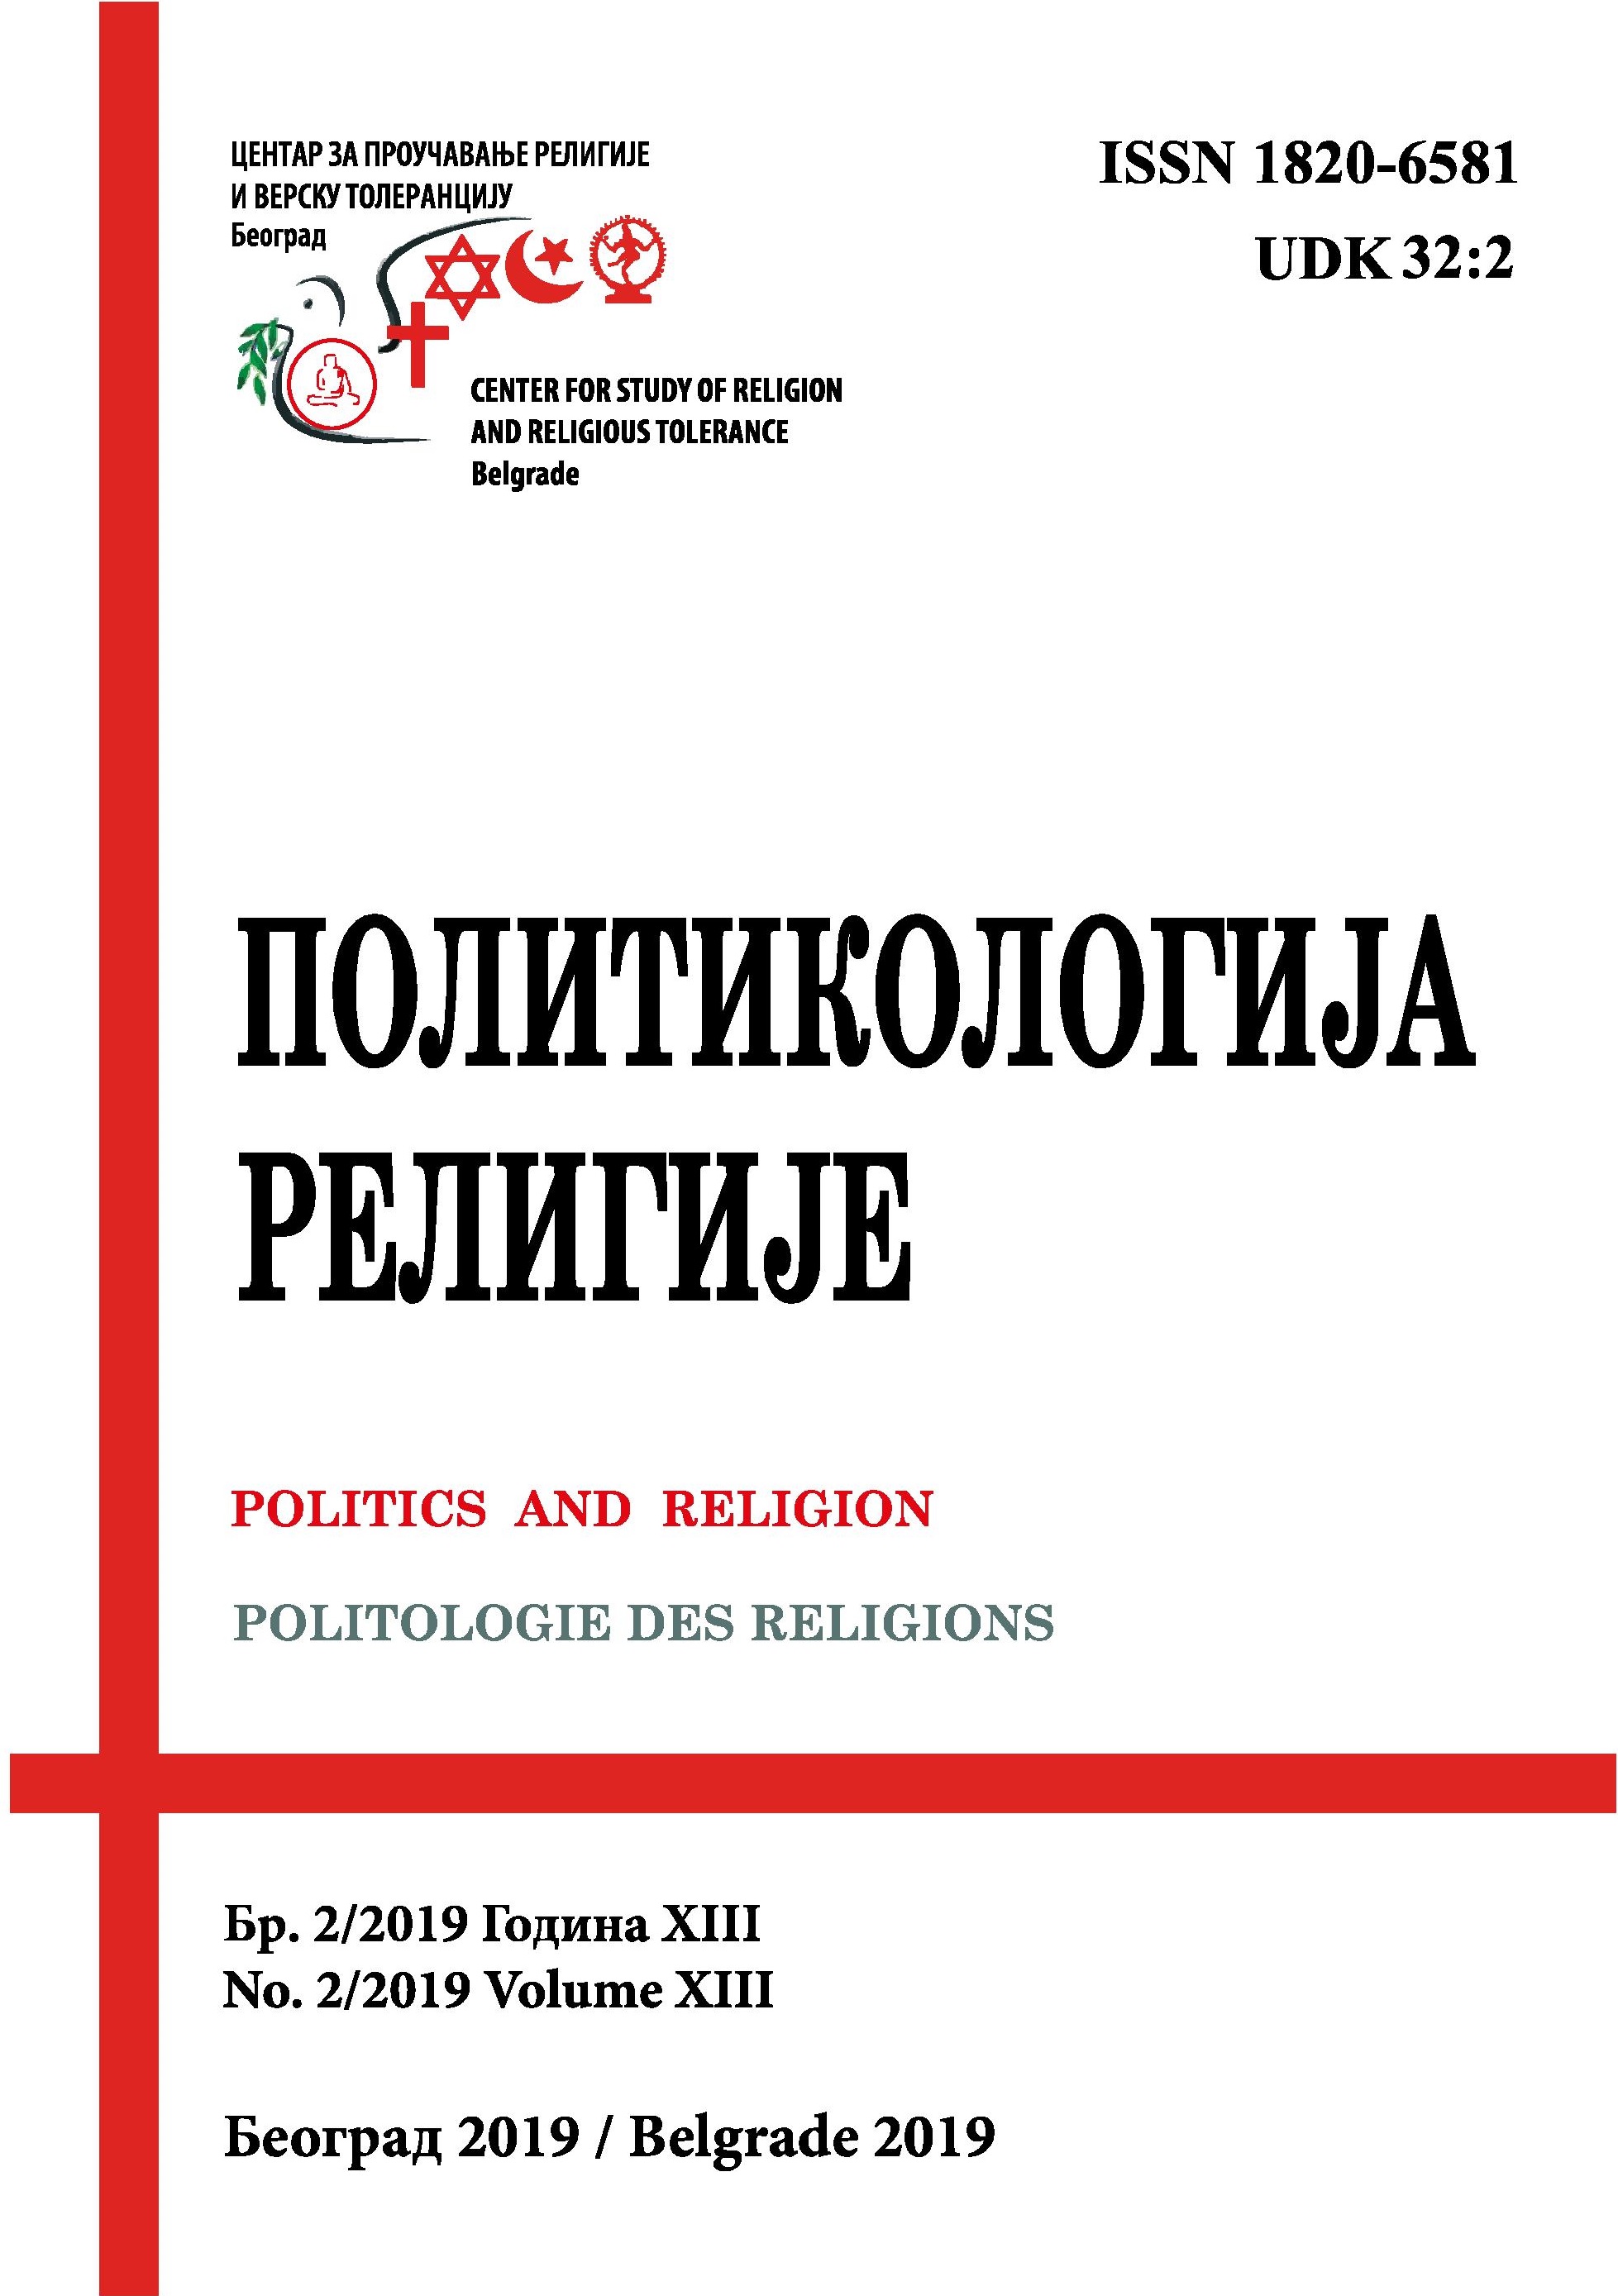 THE SECULARIZATION AND DESECULARIZATION NEXUS IN THE TURKISH CONTEXT: WHAT IS BEHIND